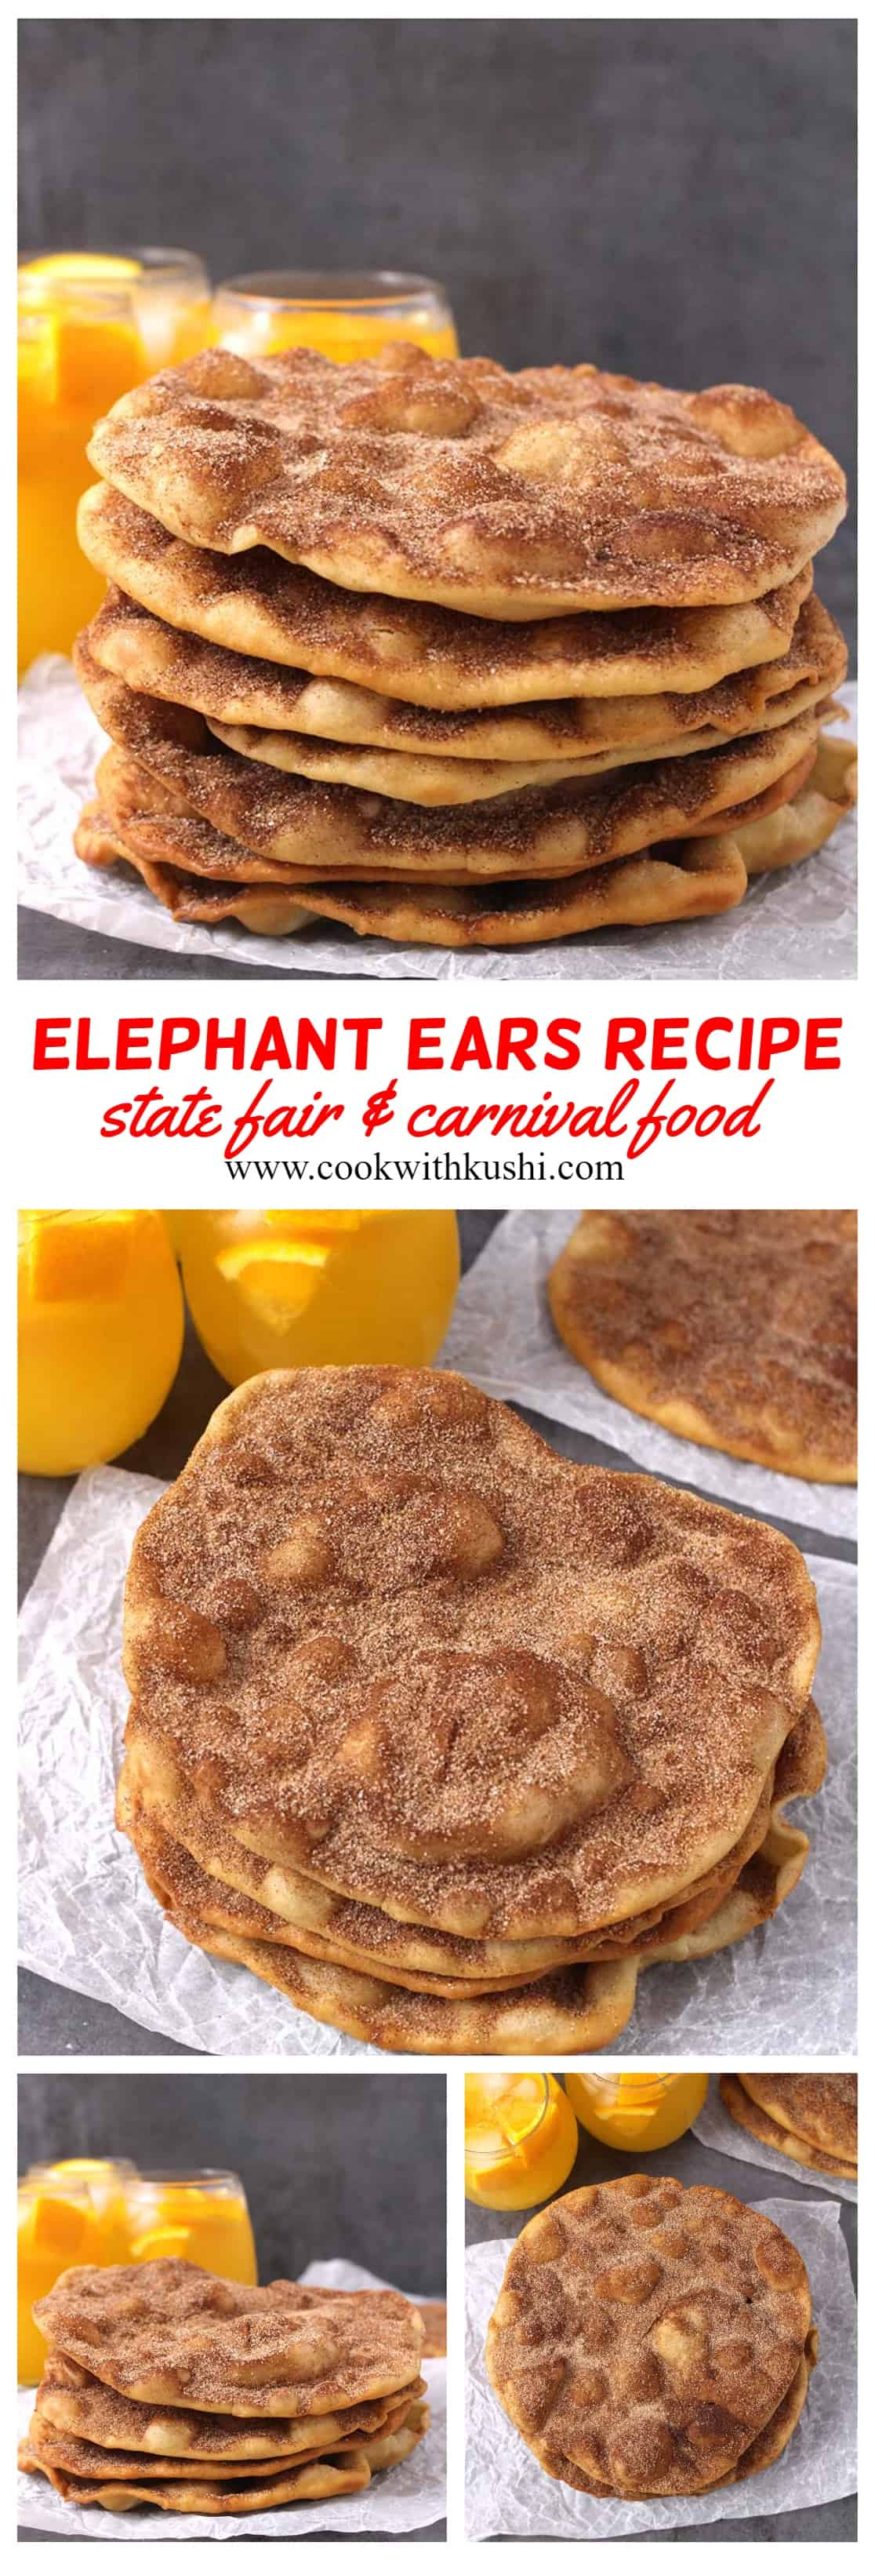 Elephant Ears are irresistibly delicious and addictive fried dough sprinkled with cinnamon sugar. This is not only simple and easy to prepare but also one of our most favorite state fair & carnival food recipe. #elephantears #statefair #carnivalfood #frybread #frieddough